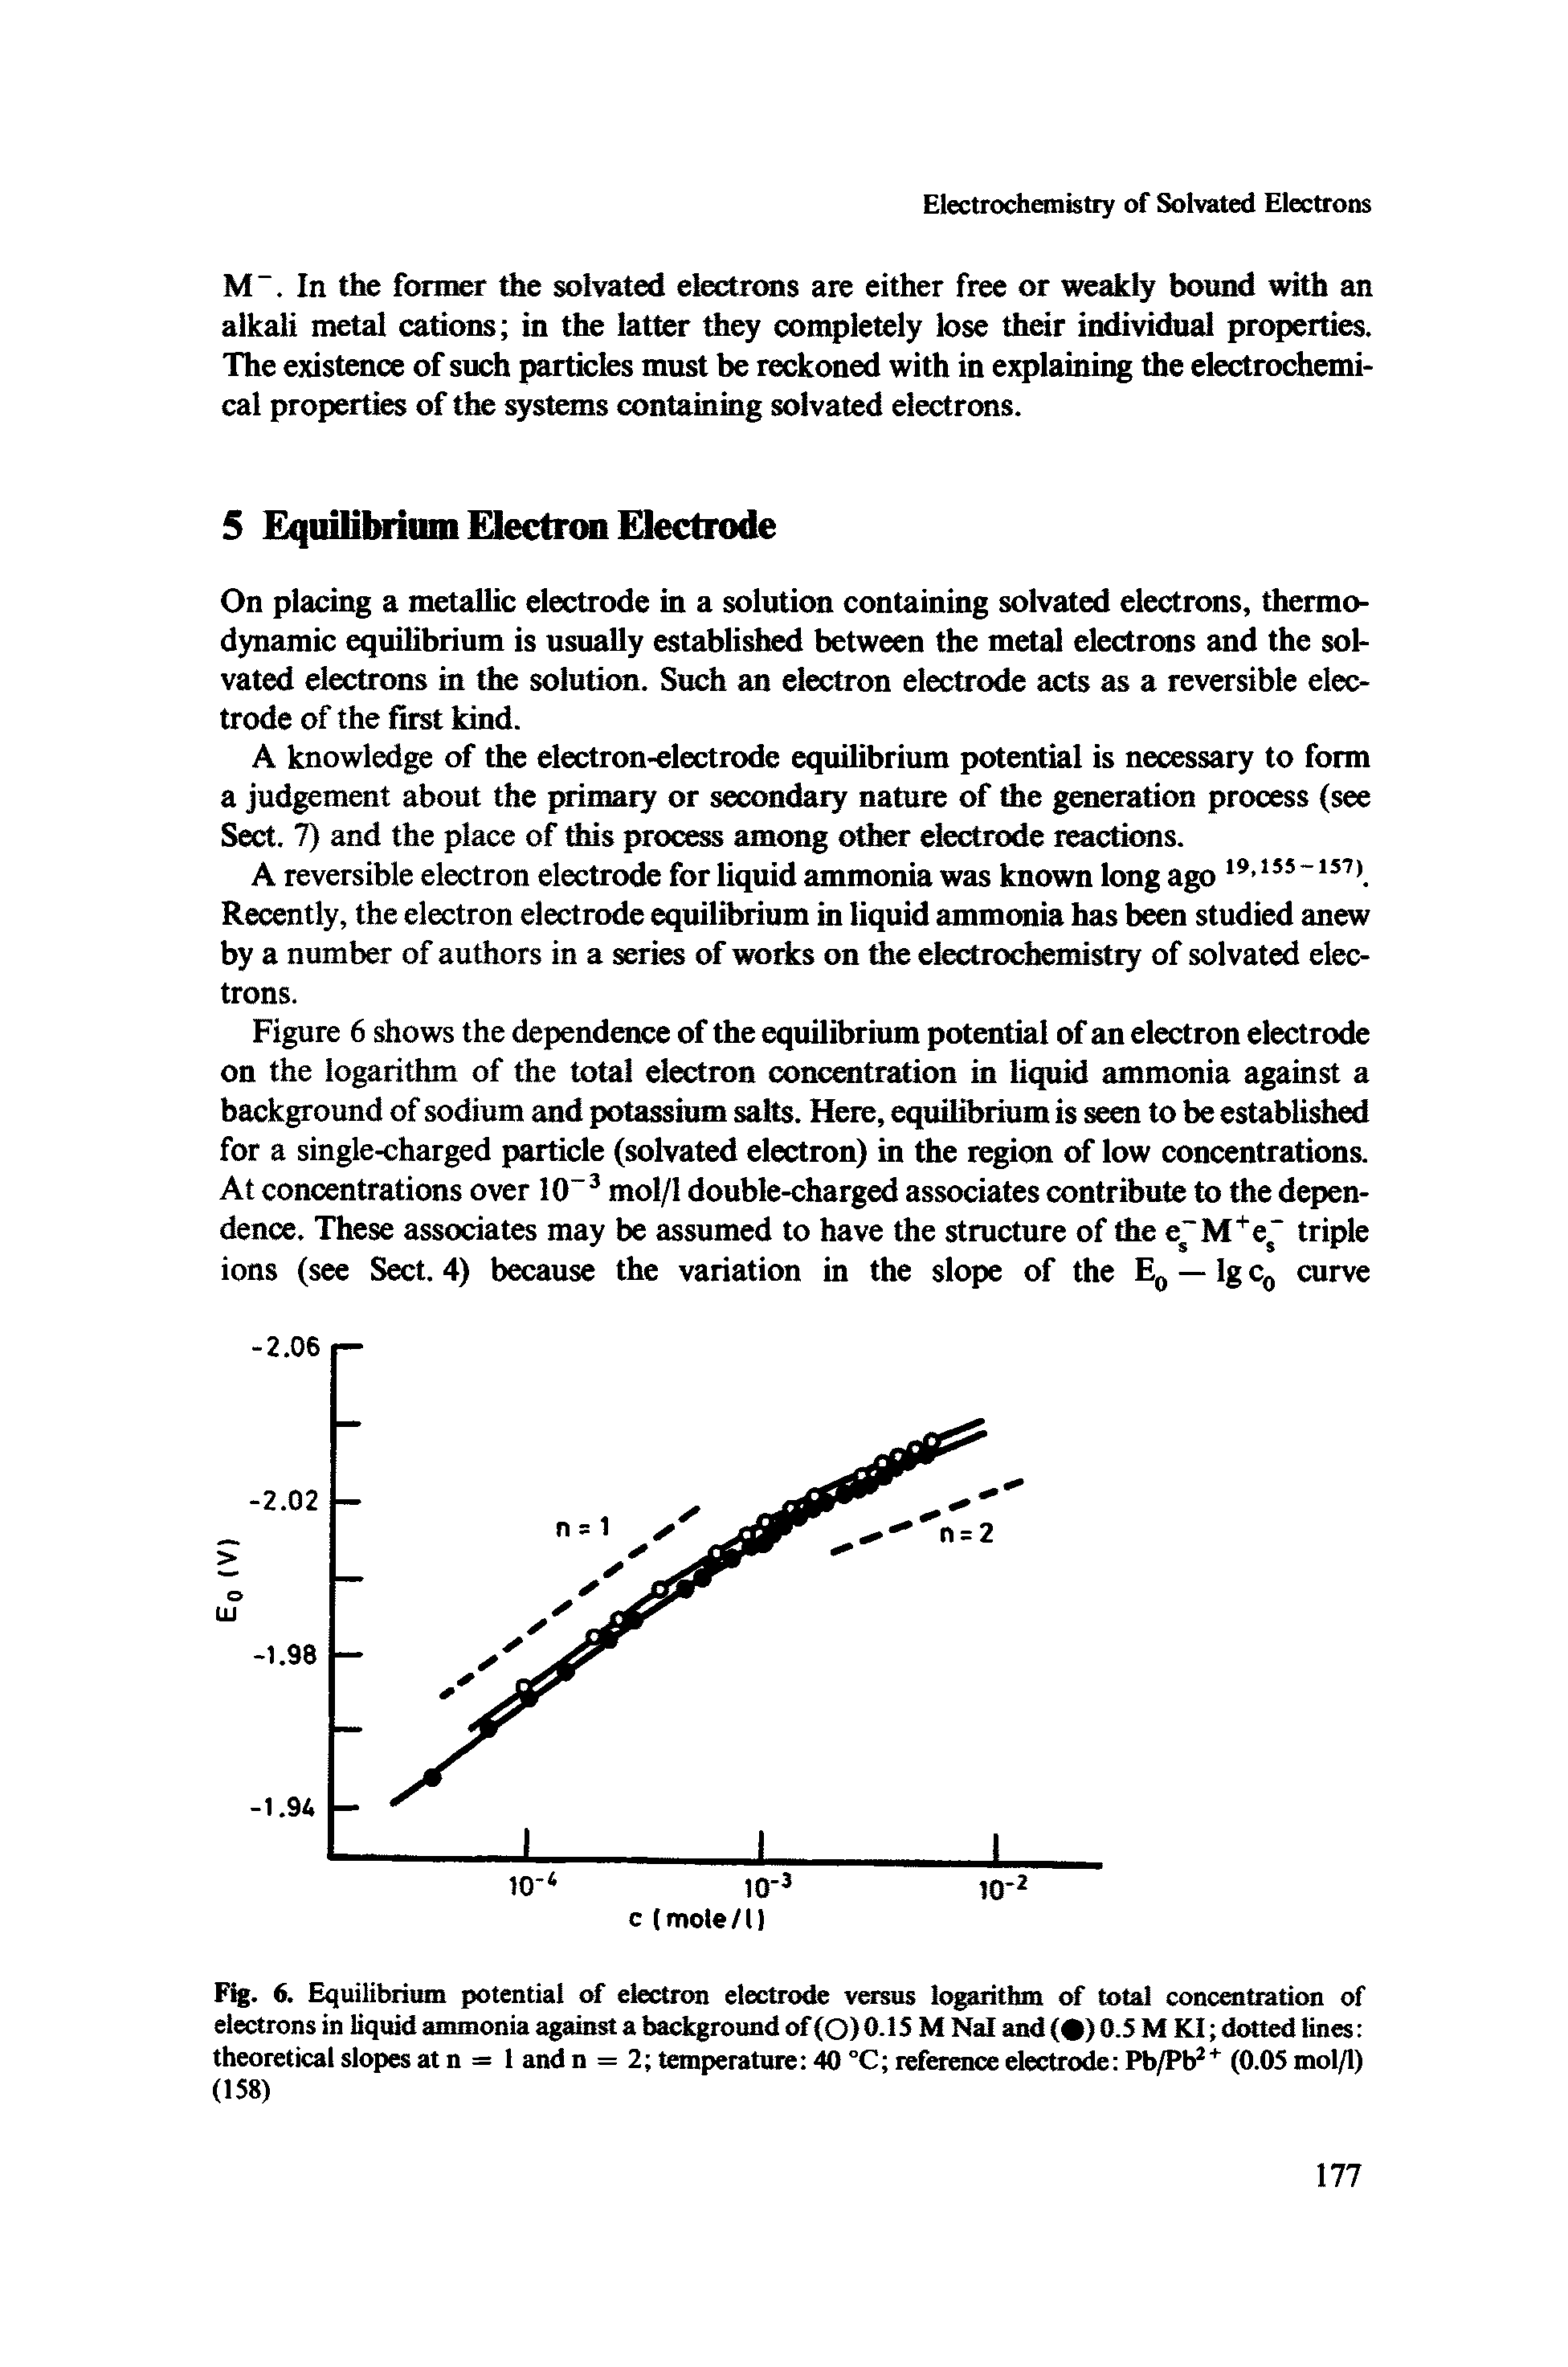 Fig. 6. Equilibrium potential of electron electrode versus logarithm of total concentration of electrons in liquid ammonia against a background of (O)O.IS M Nal and ) 0.5 M KI dotted lines theoretical slopes at n = 1 and n = 2 temperature 40 °C reference electrode Pb/Pb (0.05 mol/1) (158)...